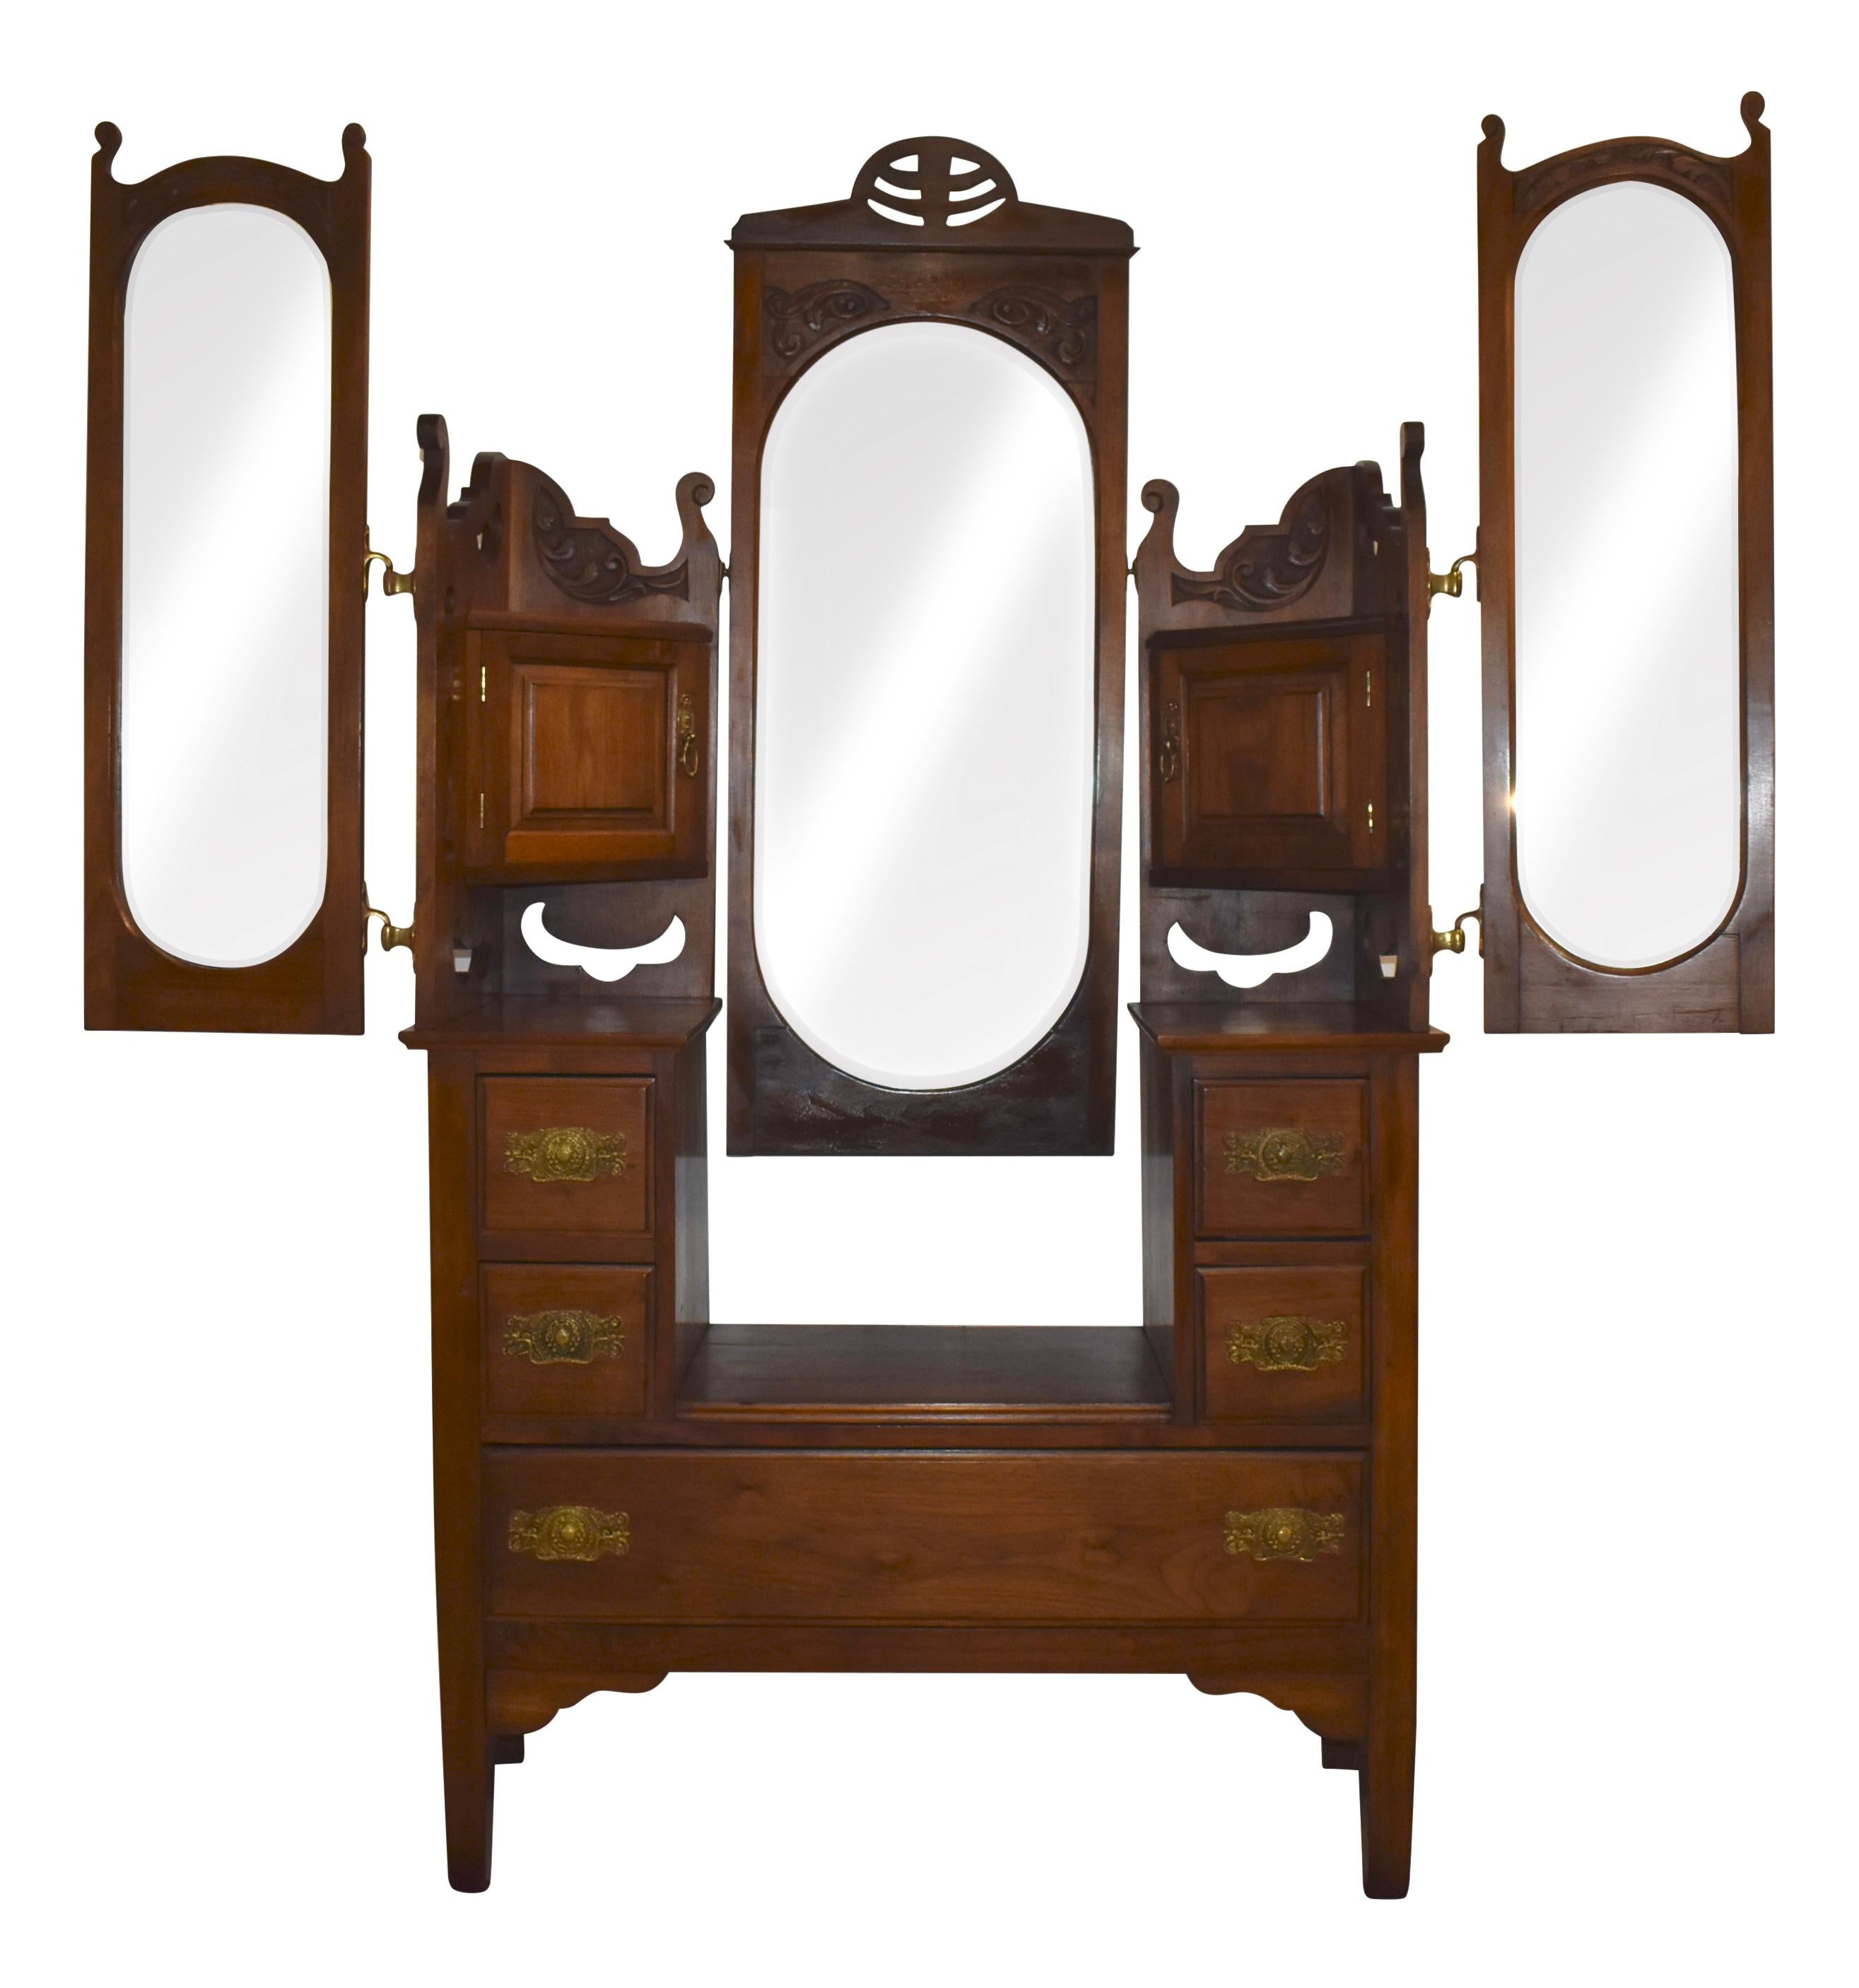 This stately, Edwardian dresser from the late 19th century features adjustable beveled mirrors and generous storage. A drop-center flanked by two small drawers on each side over a wide lower drawer creates space for a pivoting oval mirror in a